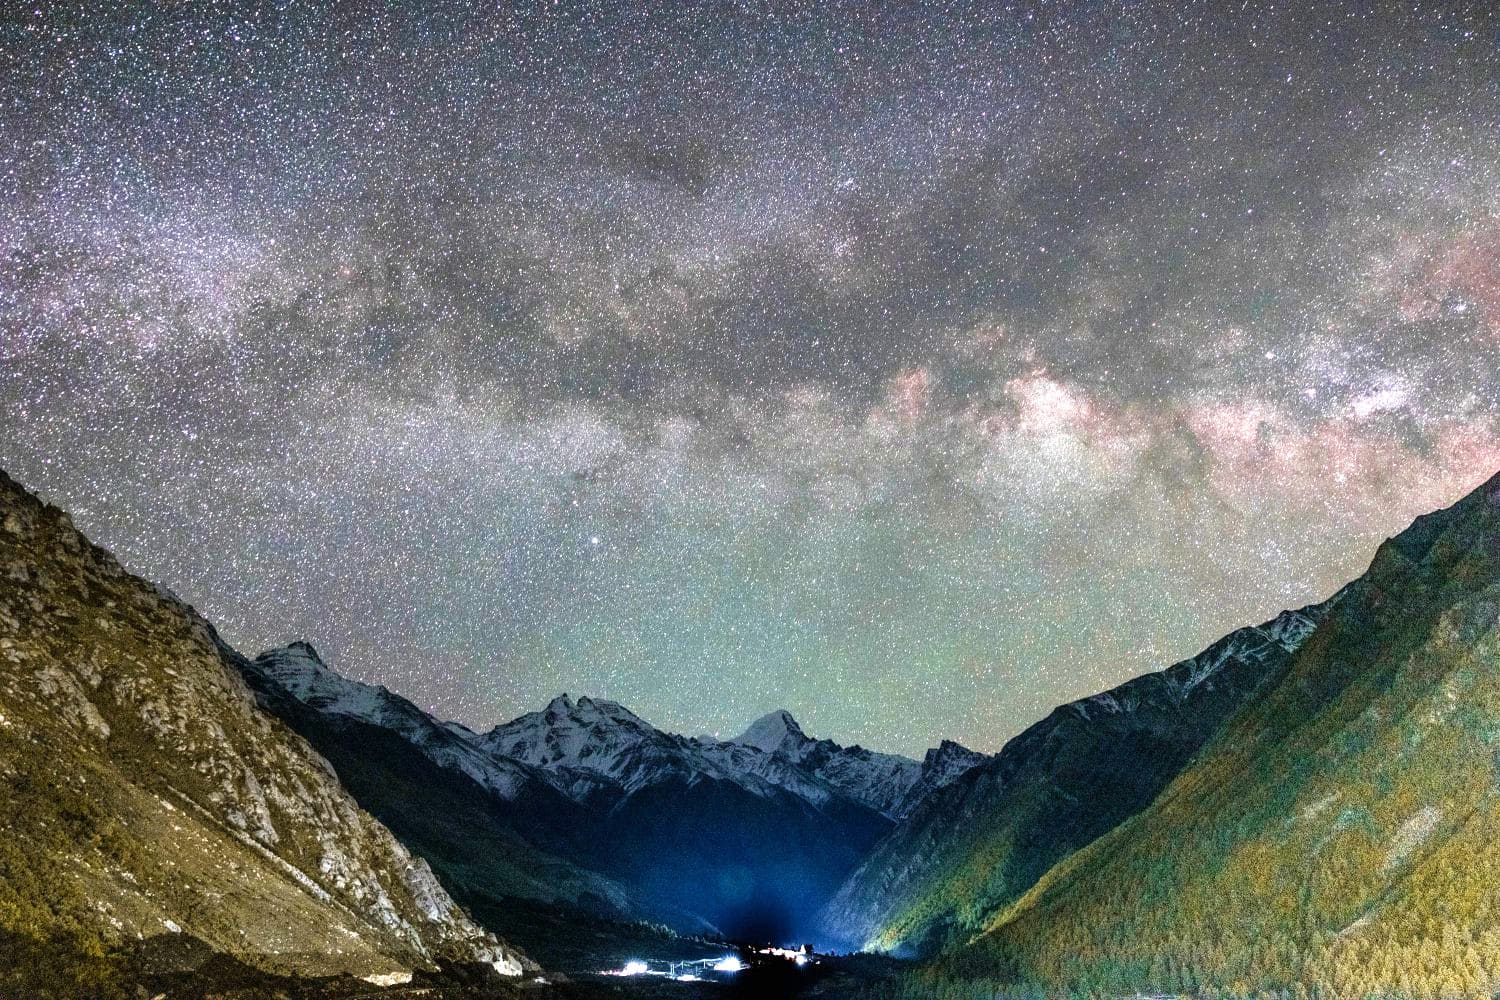 Starry night sky and milky way over Chitkul village